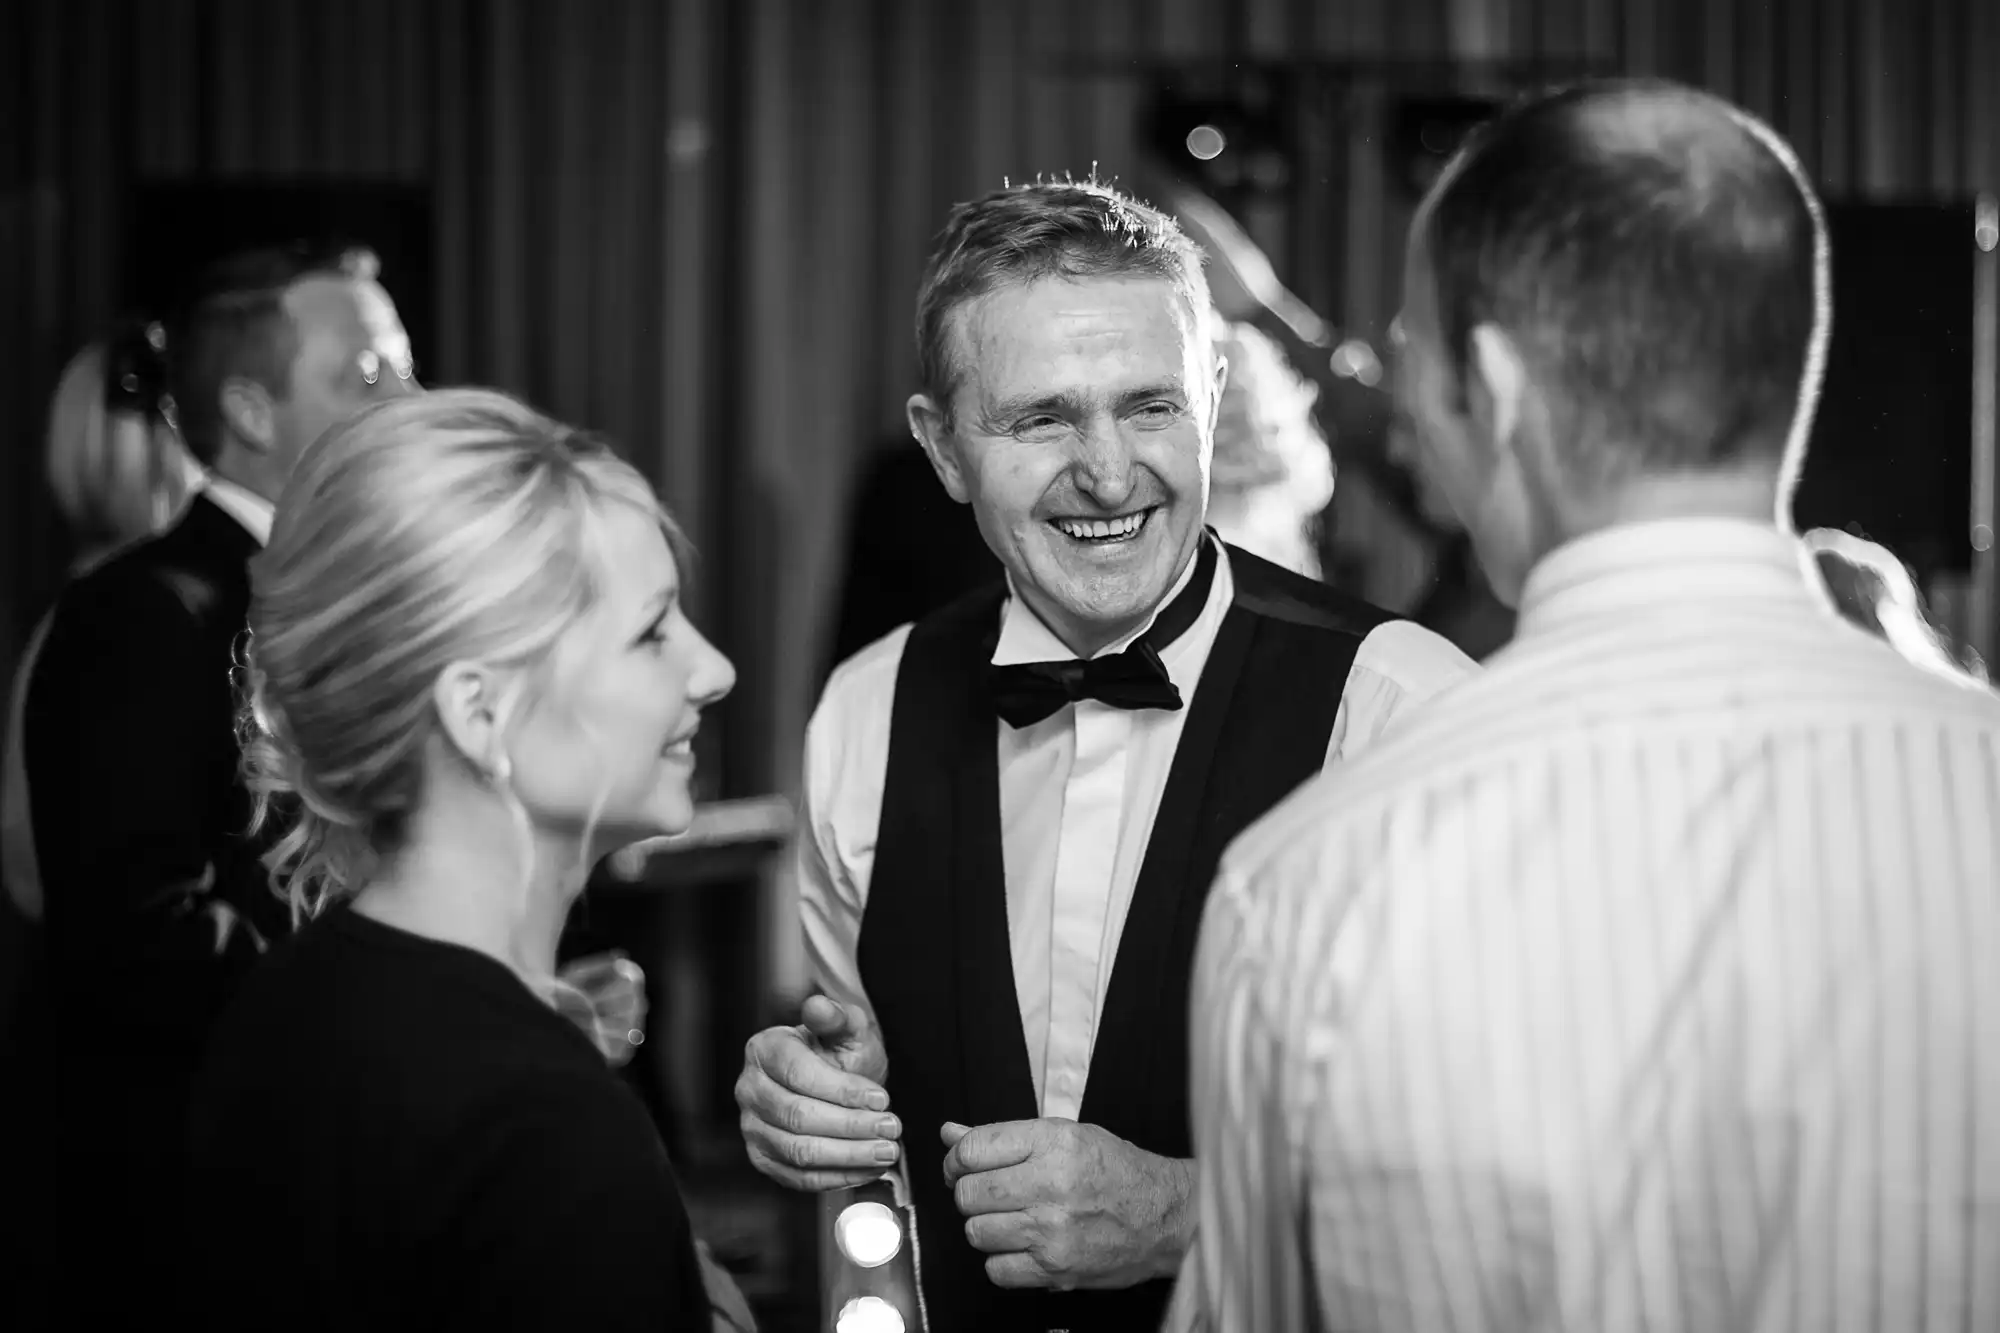 An older man in a tuxedo smiles while chatting with people at a formal event, captured in black and white.